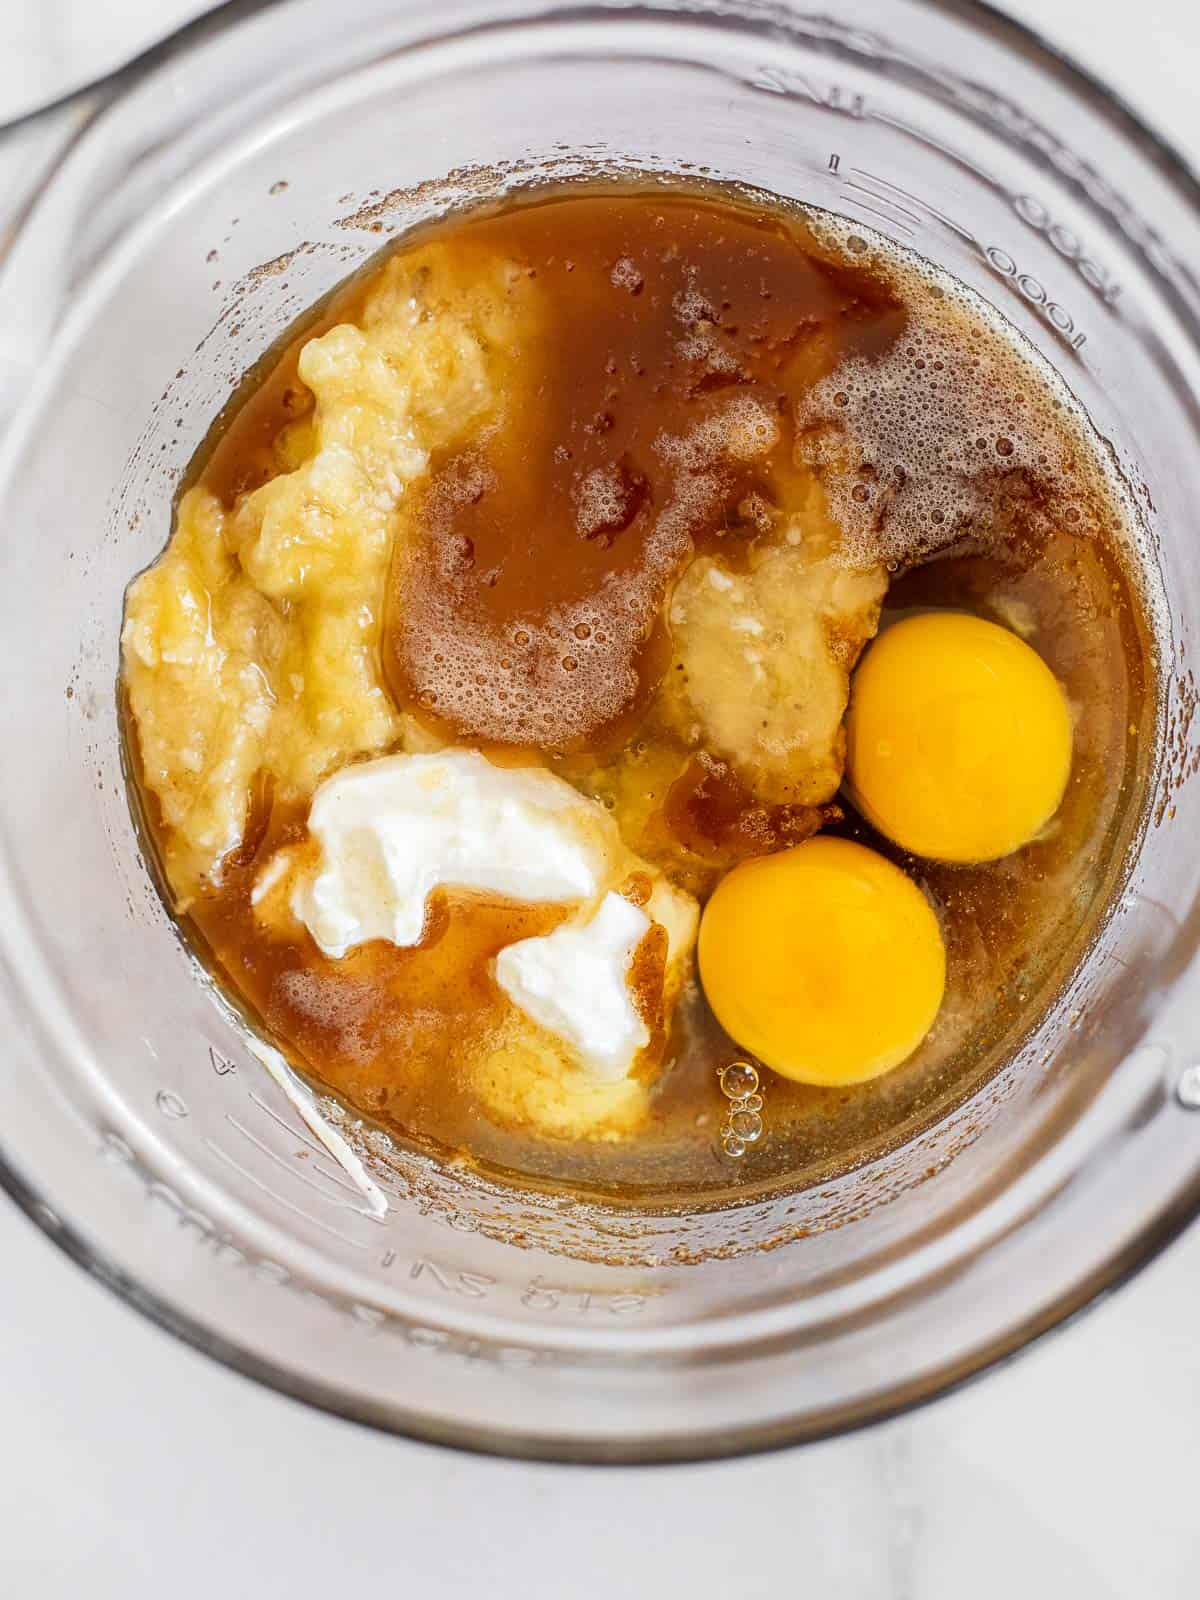 brown butter, sugar, eggs, bananas, and sour cream in a glass mixing bowl.